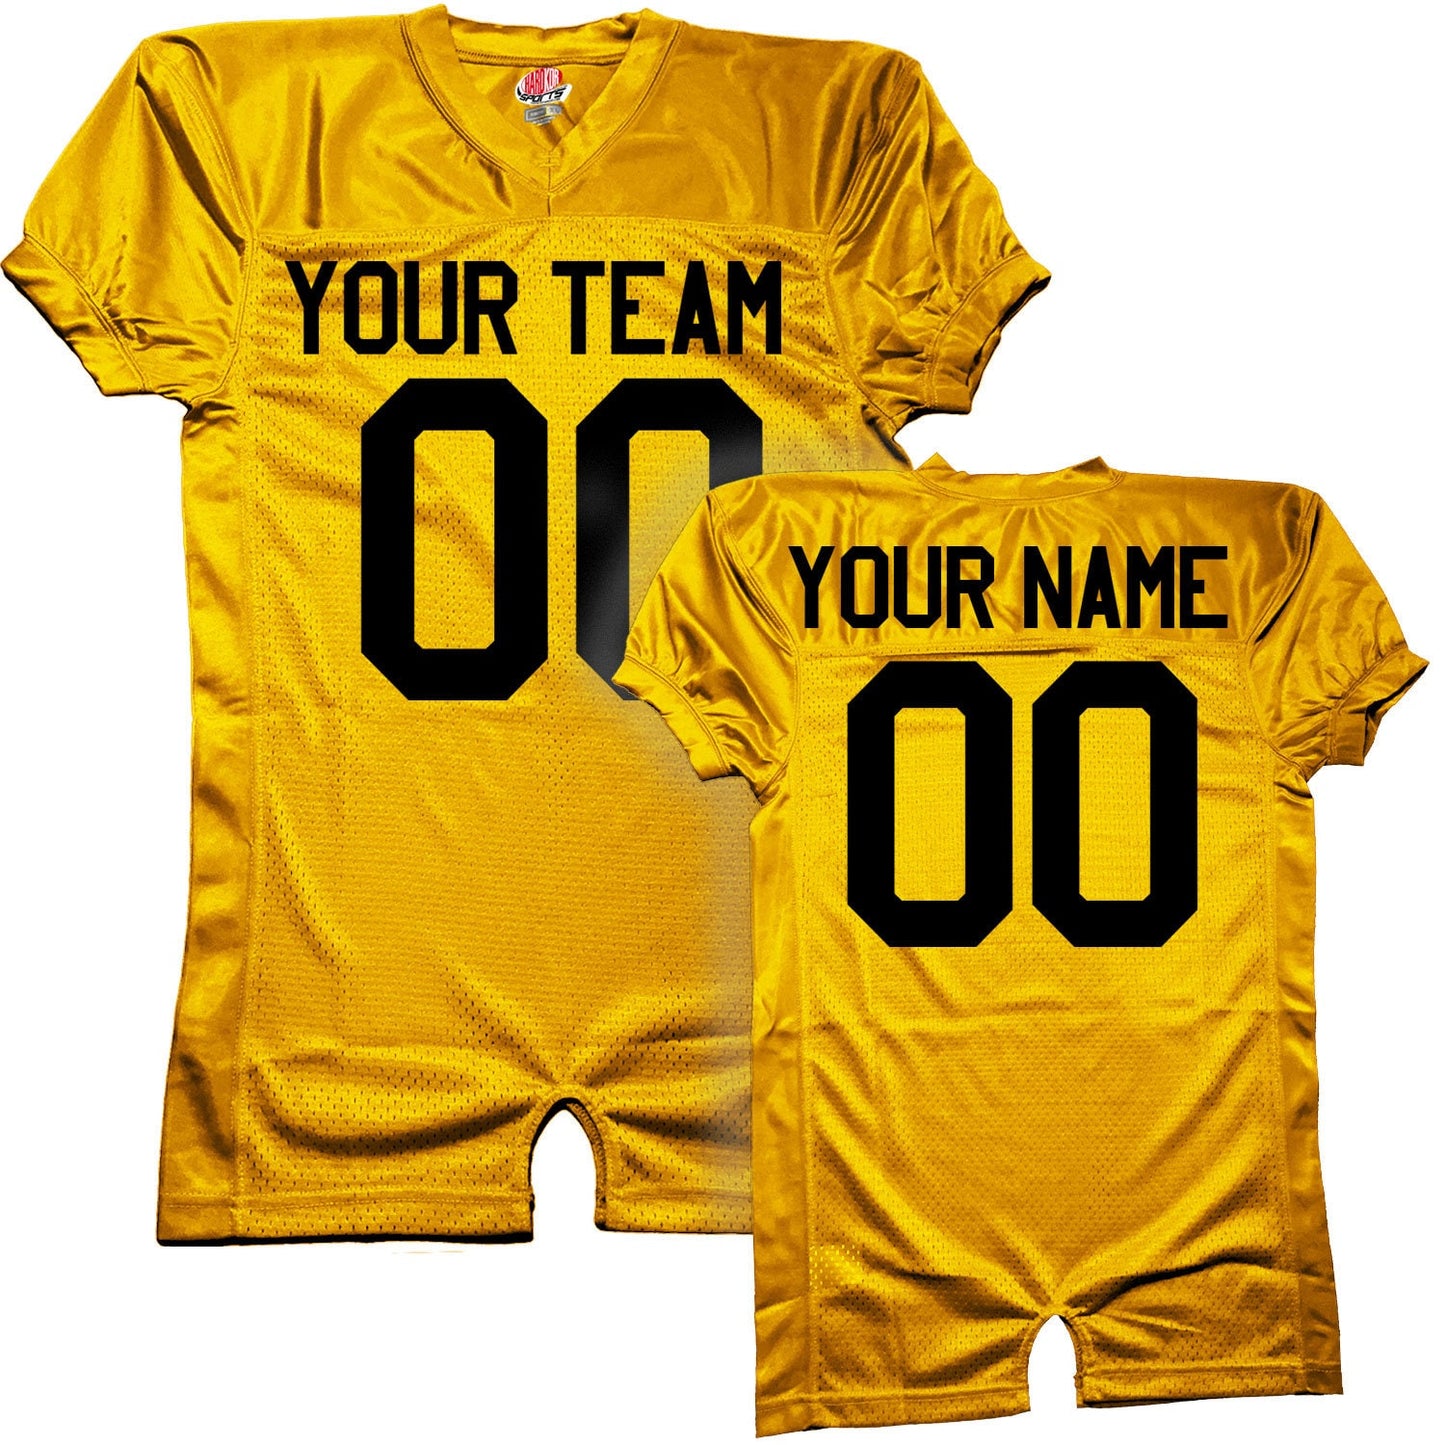 Authentic Football Jersey, Real Professional Materials, Customized Team, Maroon, Gold, Vegas Gold, Cardinal, Orange Team Player Name Numbers